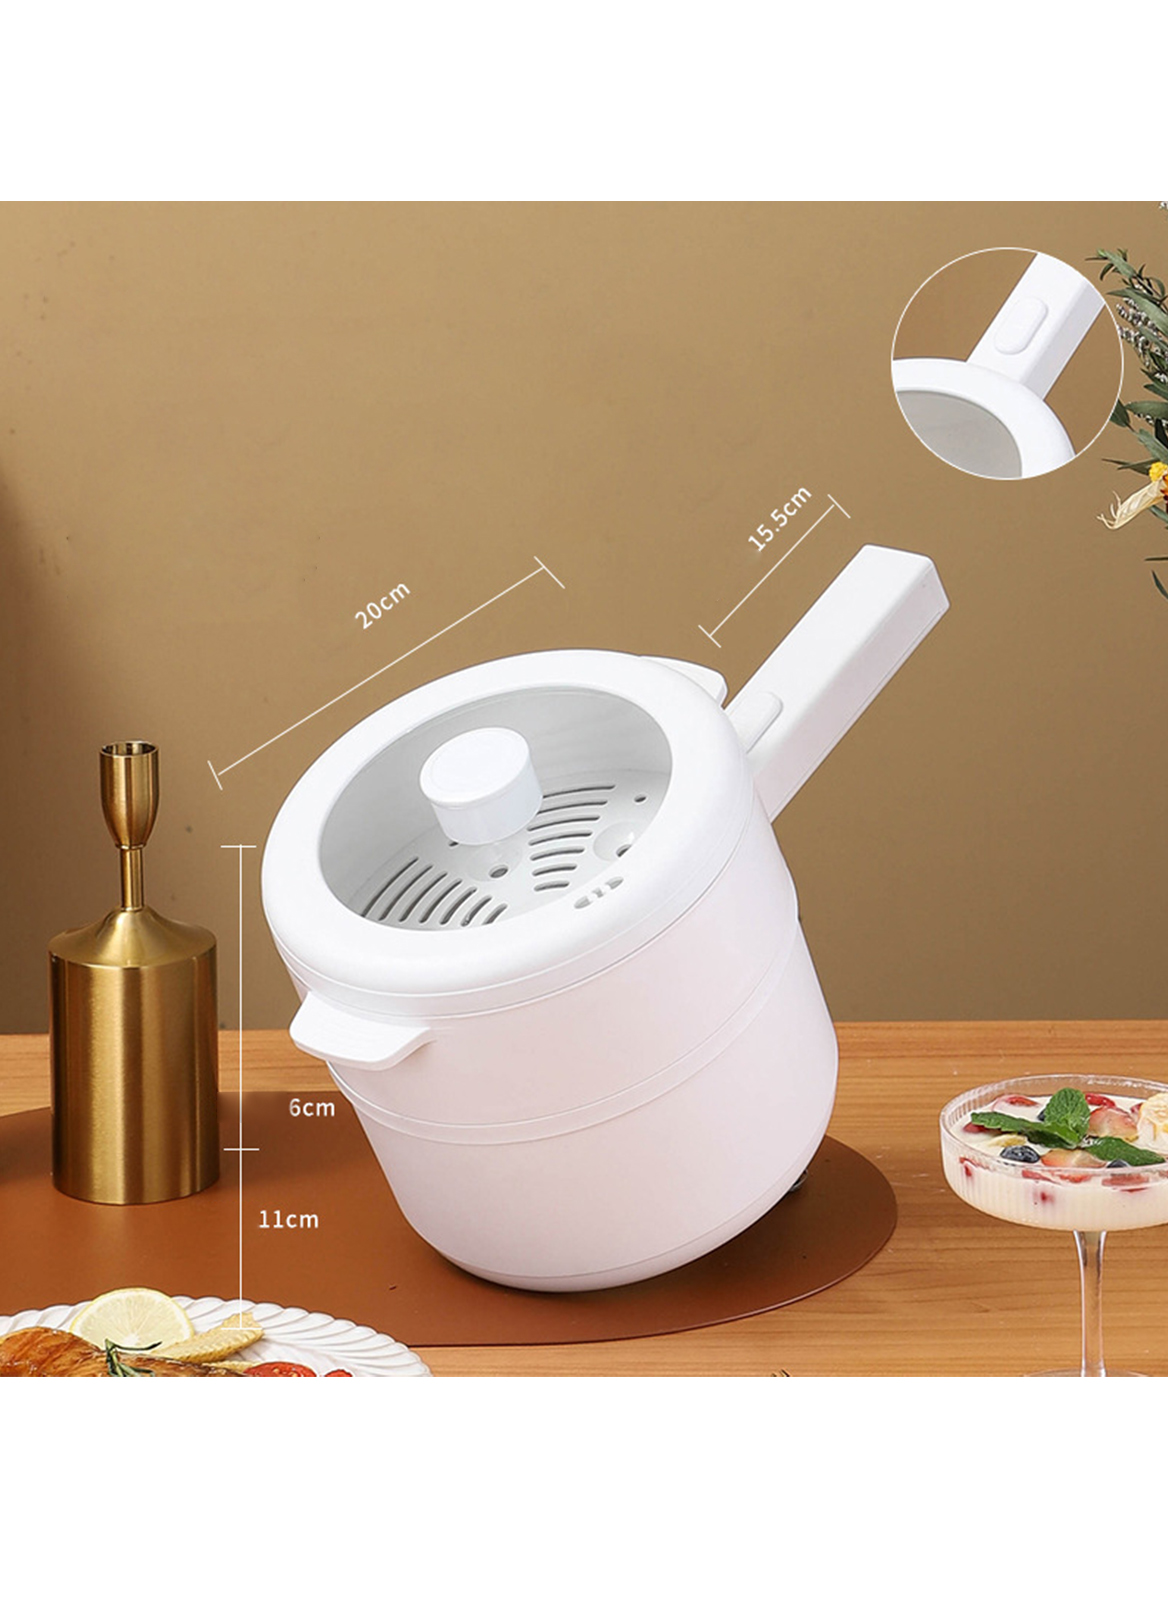 Multifunctional Household Small Power Double Layer Electric Cooking Pot 20CM